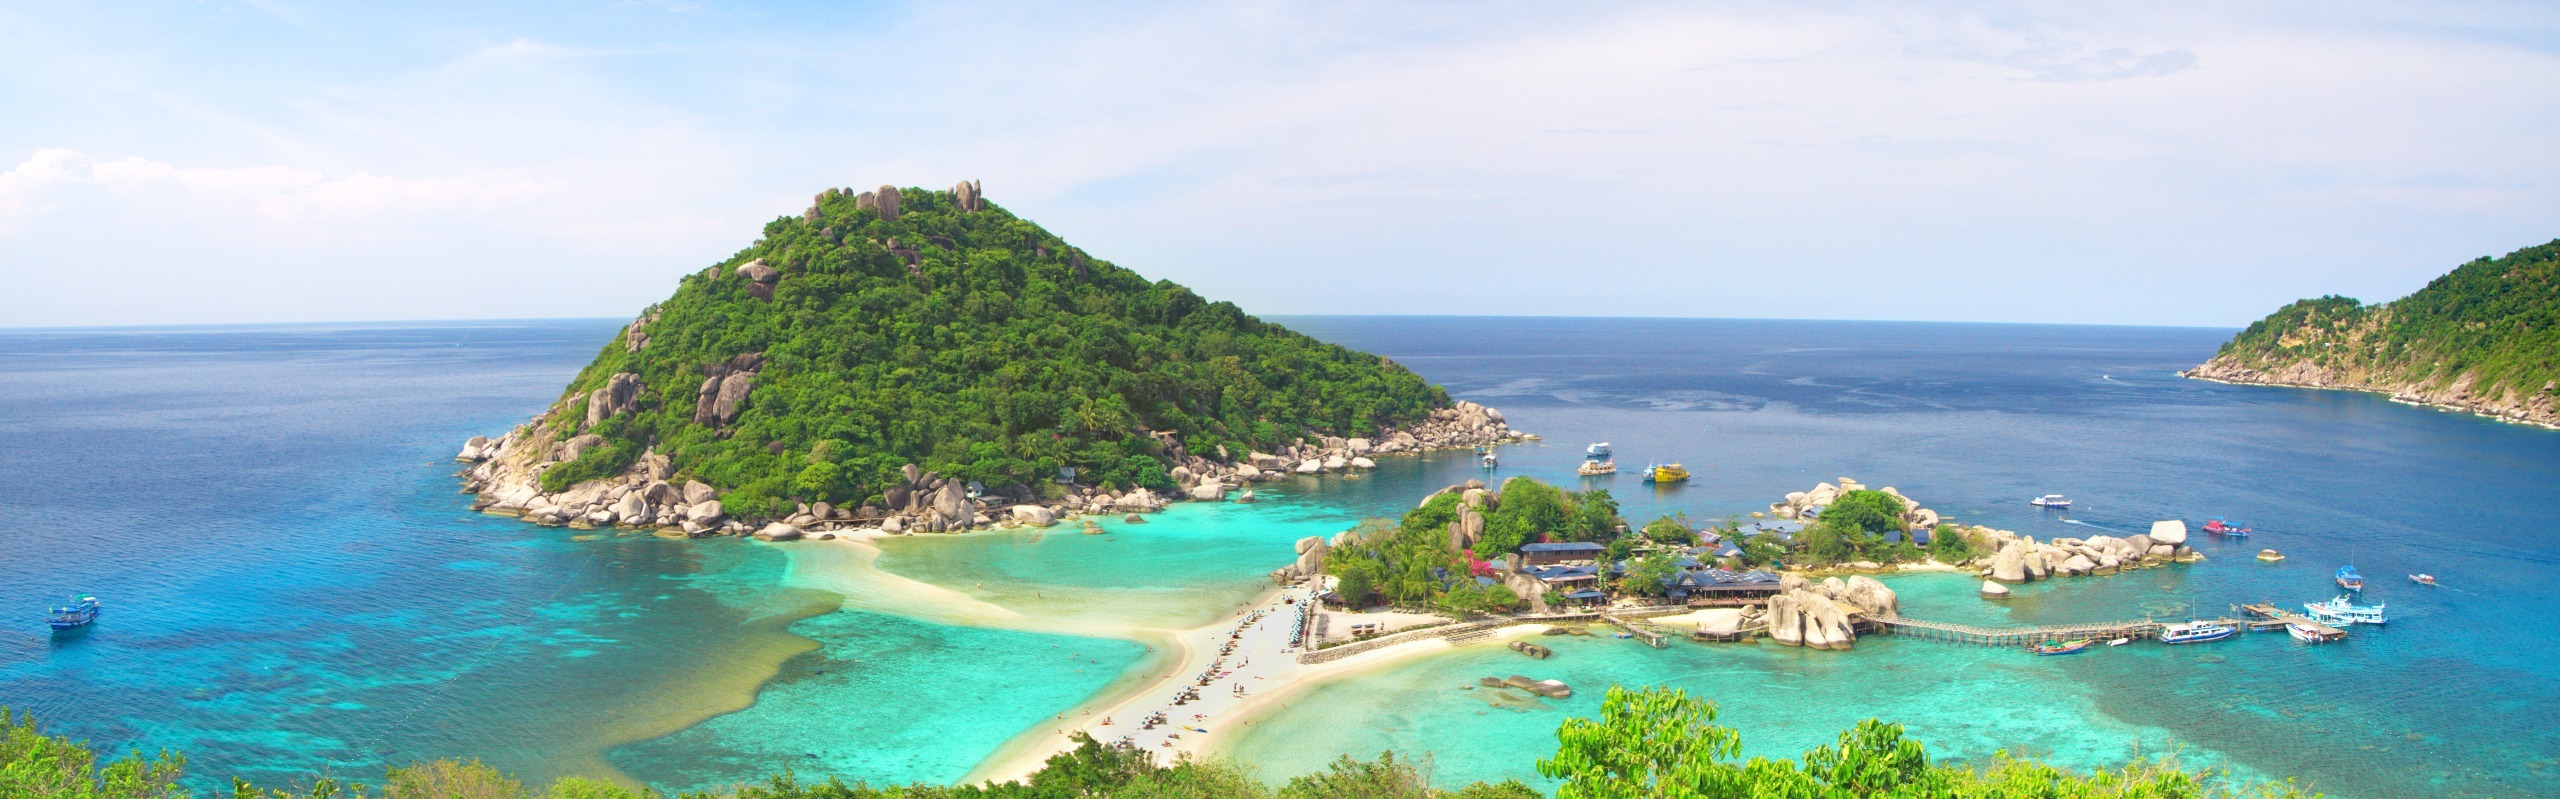 How to Choose from Thailand’s Islands (Your Island Hopping Guide)